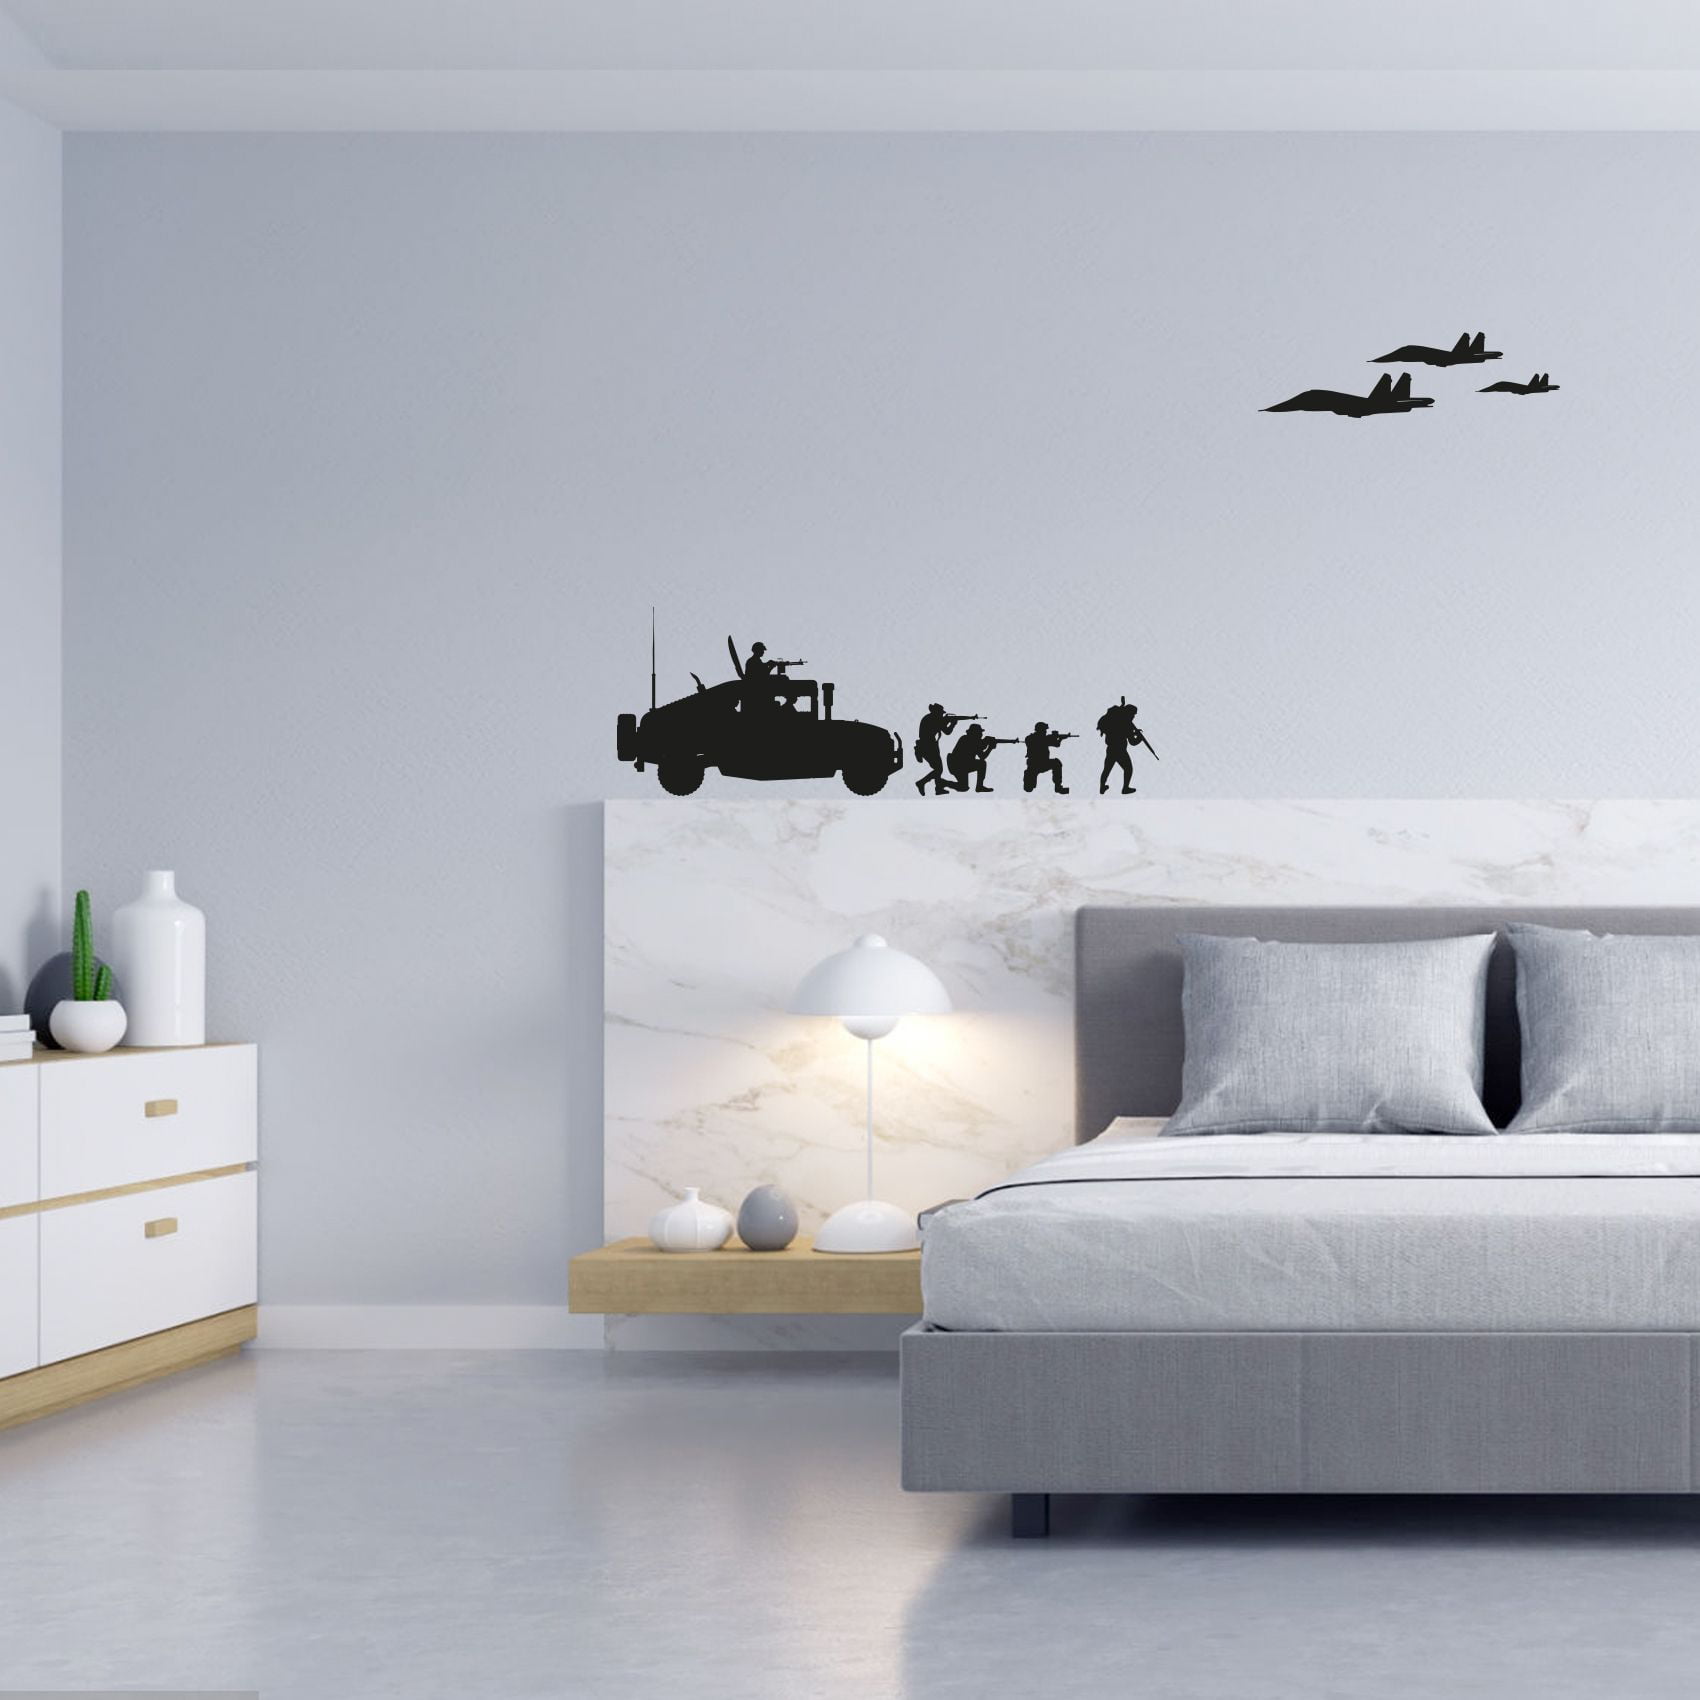 Military Swat Team Army Soldier Truck Vehicle Shadow Wall Sticker Art Decal for Girls Boys Room Rooms Home Decor Stickers Walls Art Vinyl